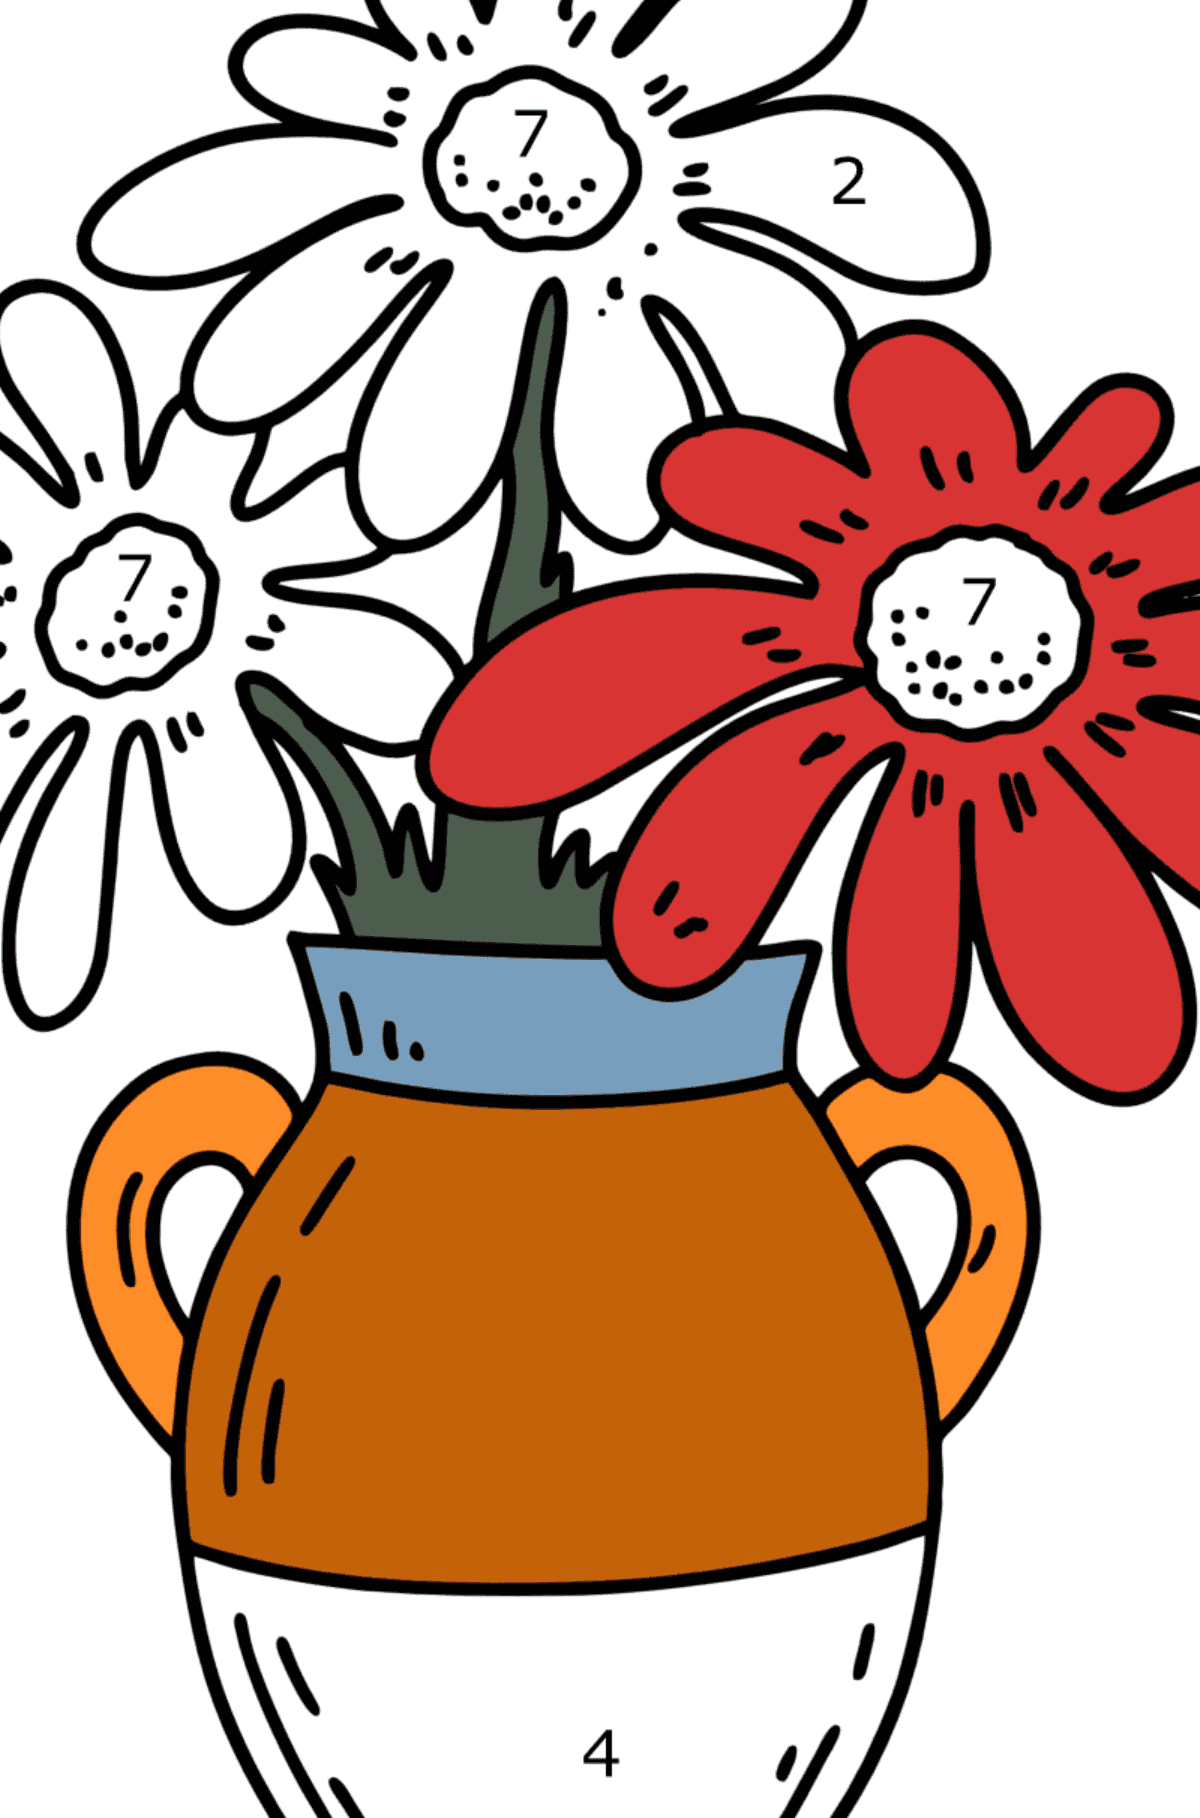 Summer Coloring page - Flowers in a vase - Coloring by Numbers for Kids